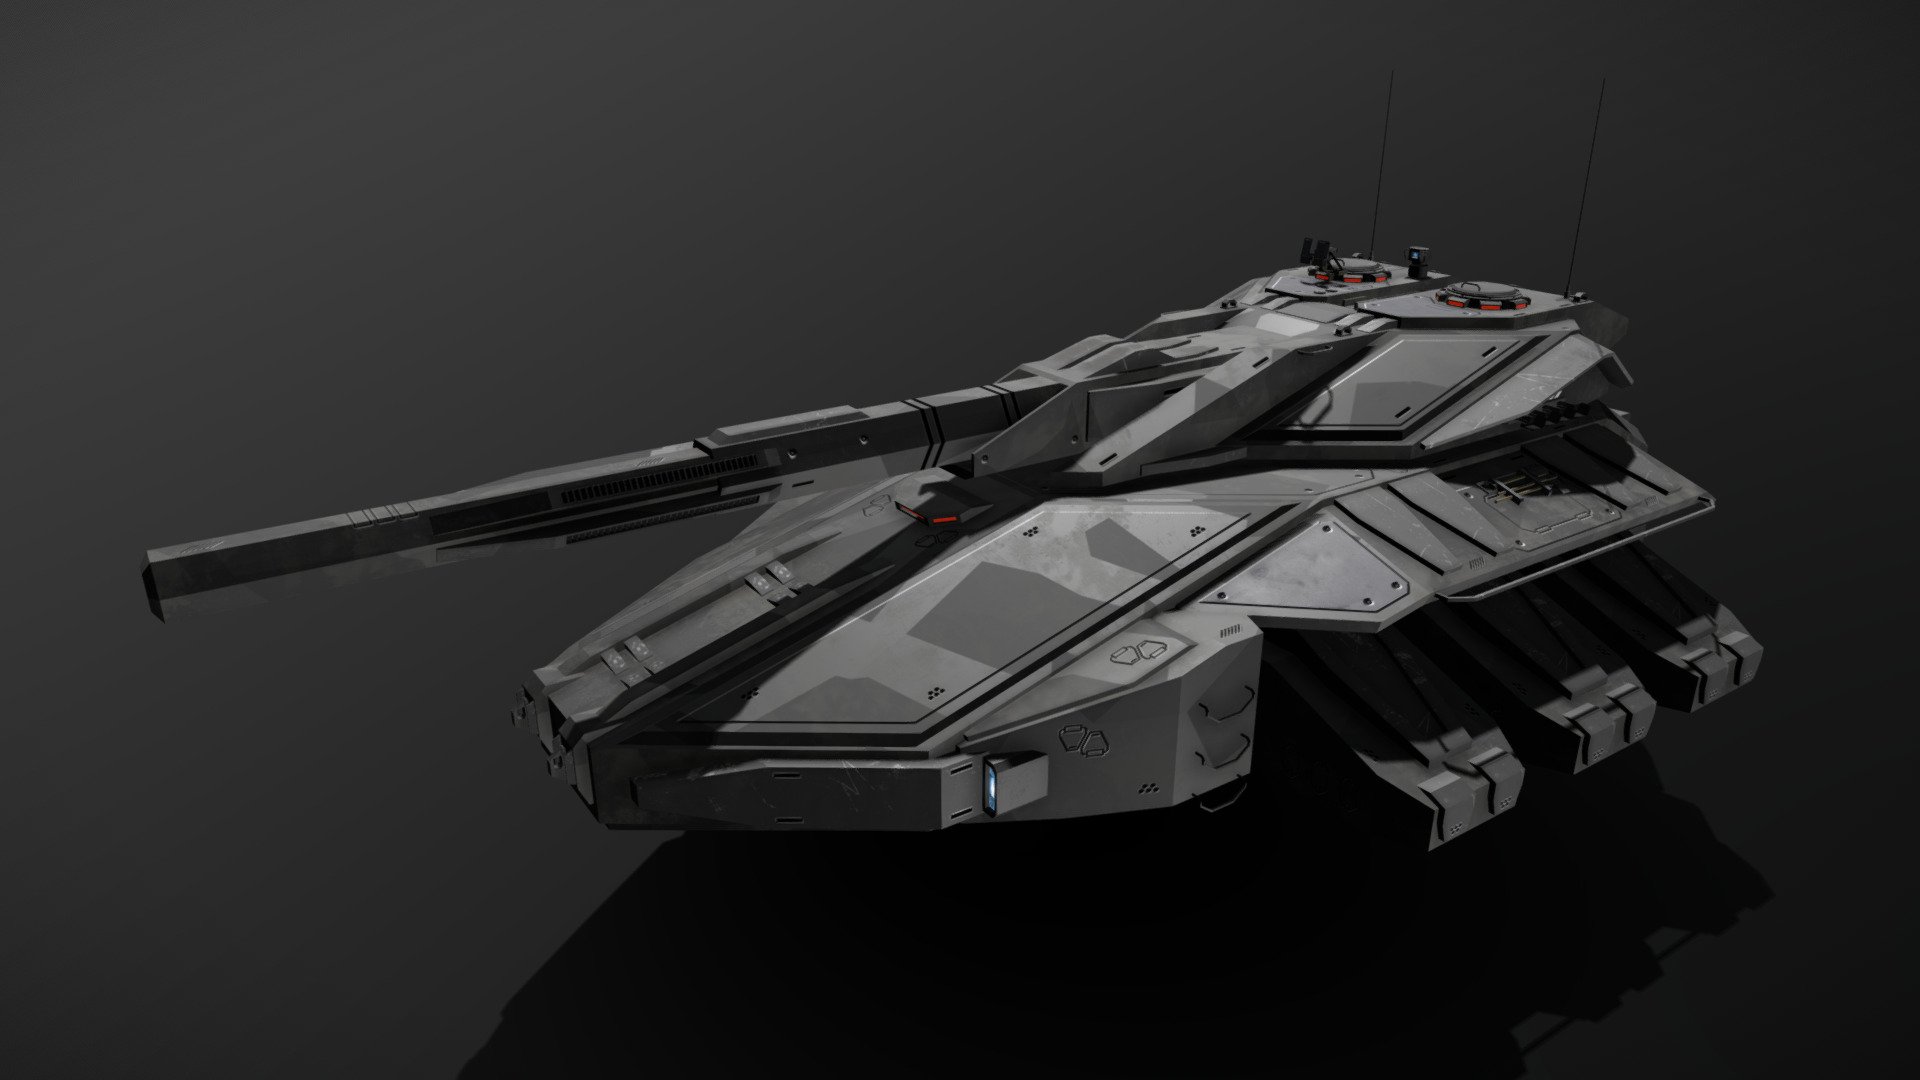 This is a model of a low-poly and game-ready scifi tank. 

The barrel consists of two separate meshes and can be animated with a keyframe animation tool (firing animation). The turret can rotate left/right, the gun can rotate up/down. The track movement can be animated with UV offset.

The model comes with several differently colored texture sets. The PSD file with intact layers is included too.

Please note: The textures in the Sketchfab viewer have a reduced resolution to improve Sketchfab loading speed.

If you have bought this model please make sure to download the “additional file”.  It contains FBX and OBJ meshes, full resolution textures and the source PSDs with intact layers. The meshes are separate and can be animated (e.g. firing animations for gun barrels, rotating turrets, etc) 3d model